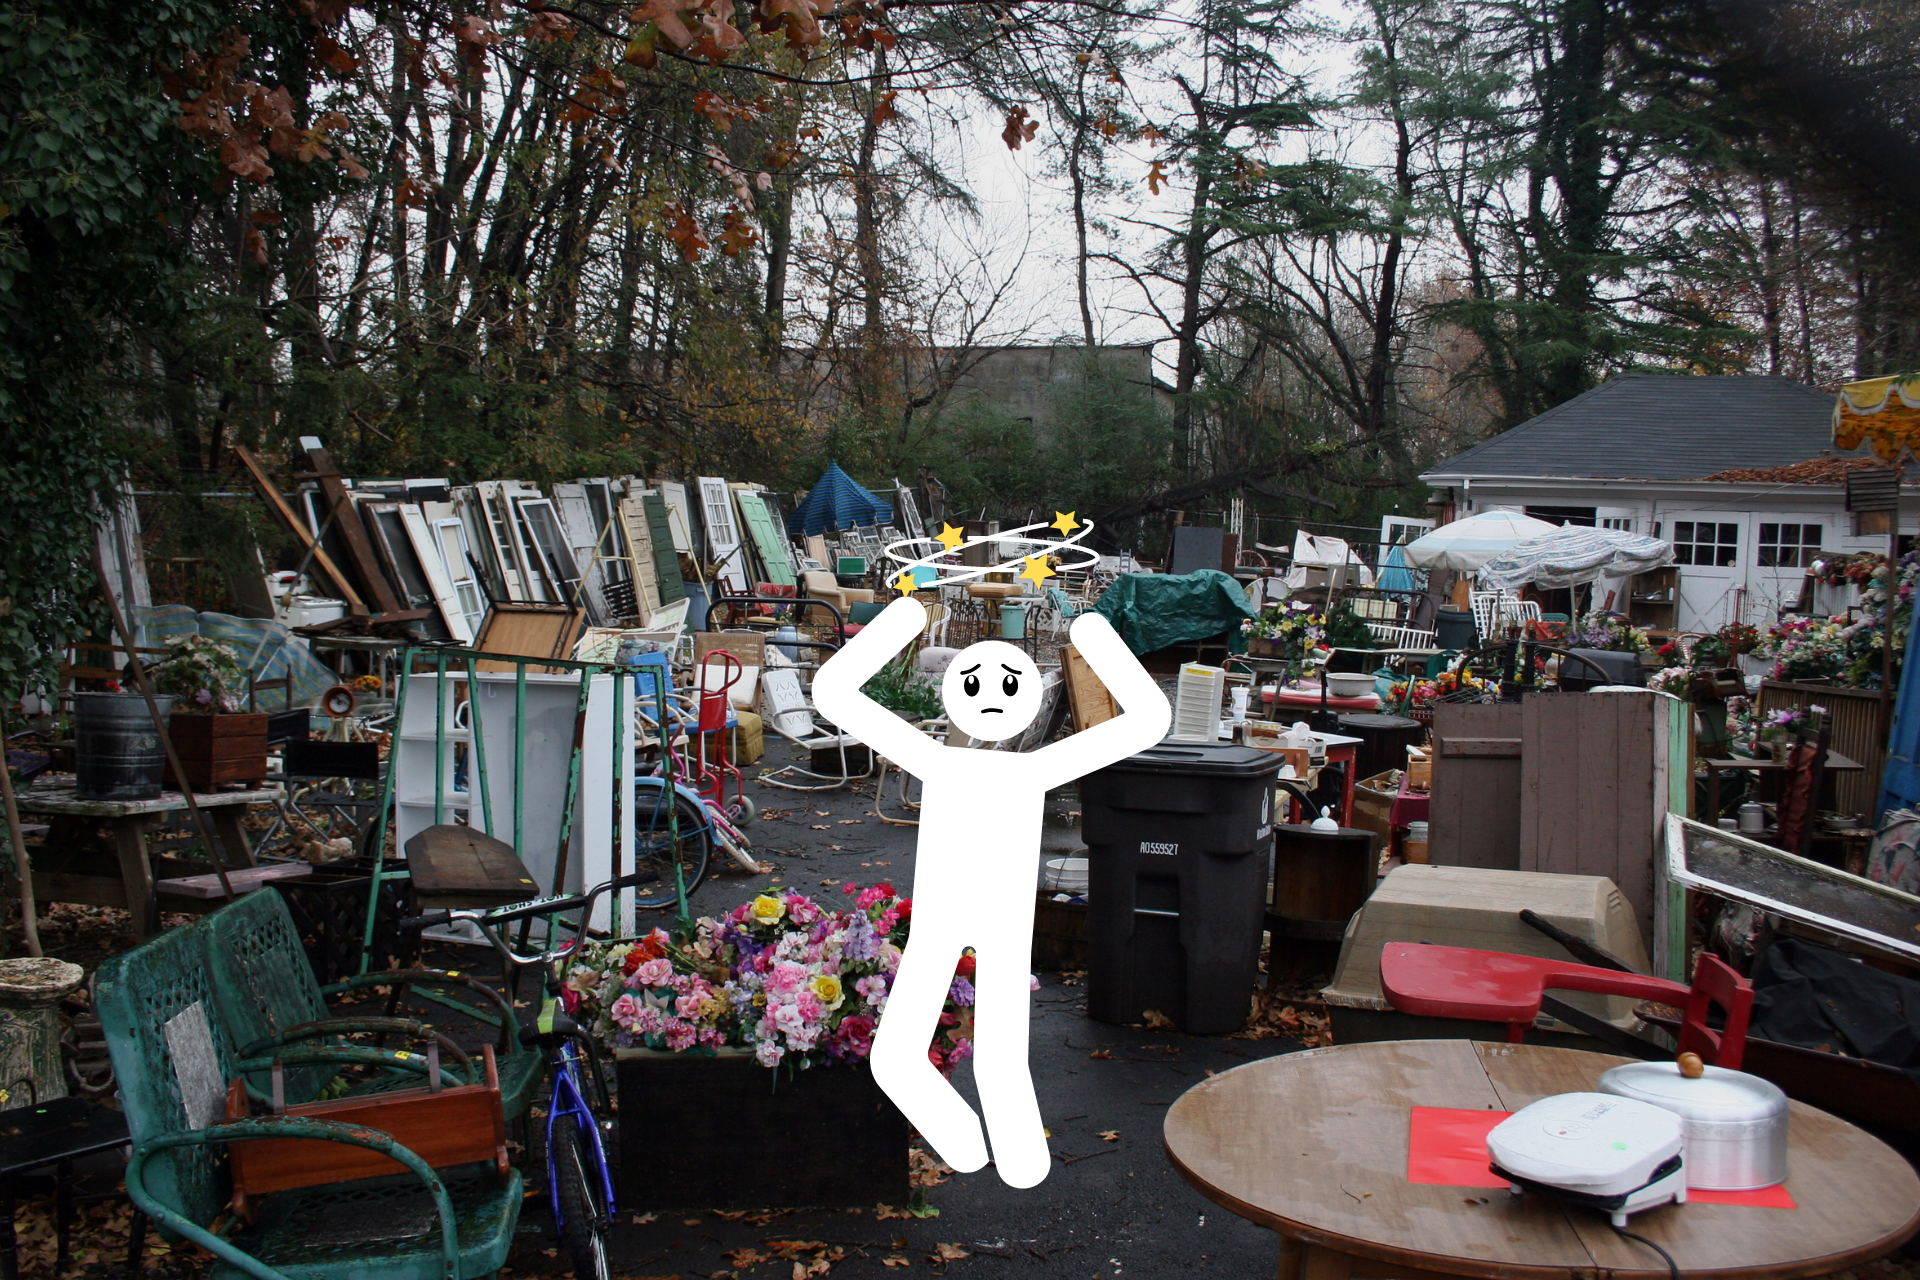 Backyard cluttered with a diverse array of items like doors, pots, plants, trashcans, and dressers,